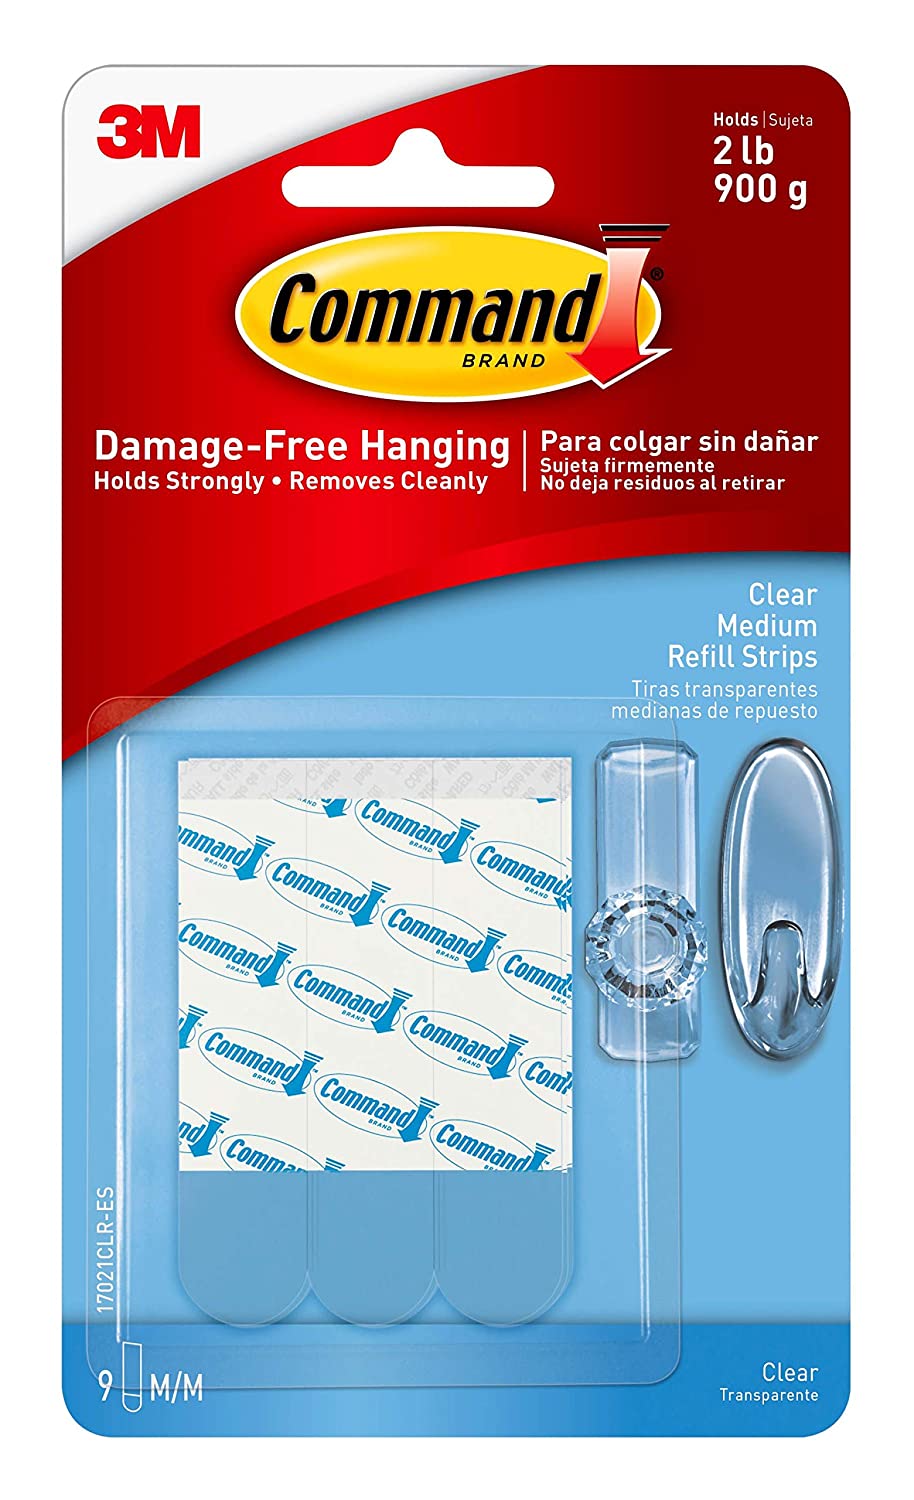 Detec™ 3M Command Clear Medium Refill Strips Pack of 30